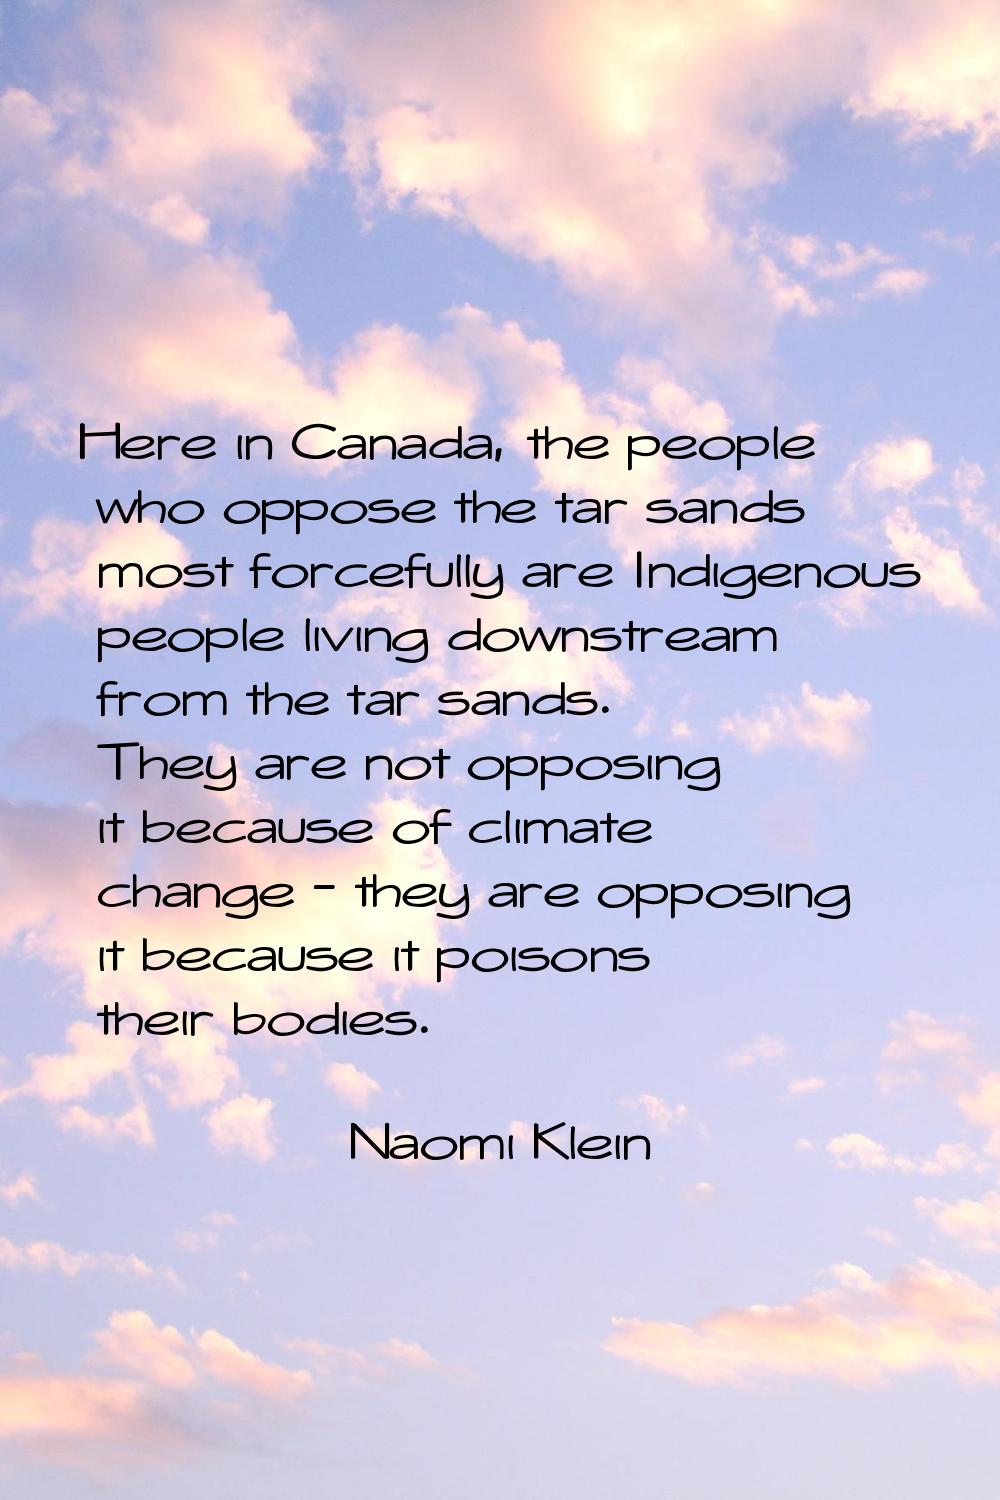 Here in Canada, the people who oppose the tar sands most forcefully are Indigenous people living do